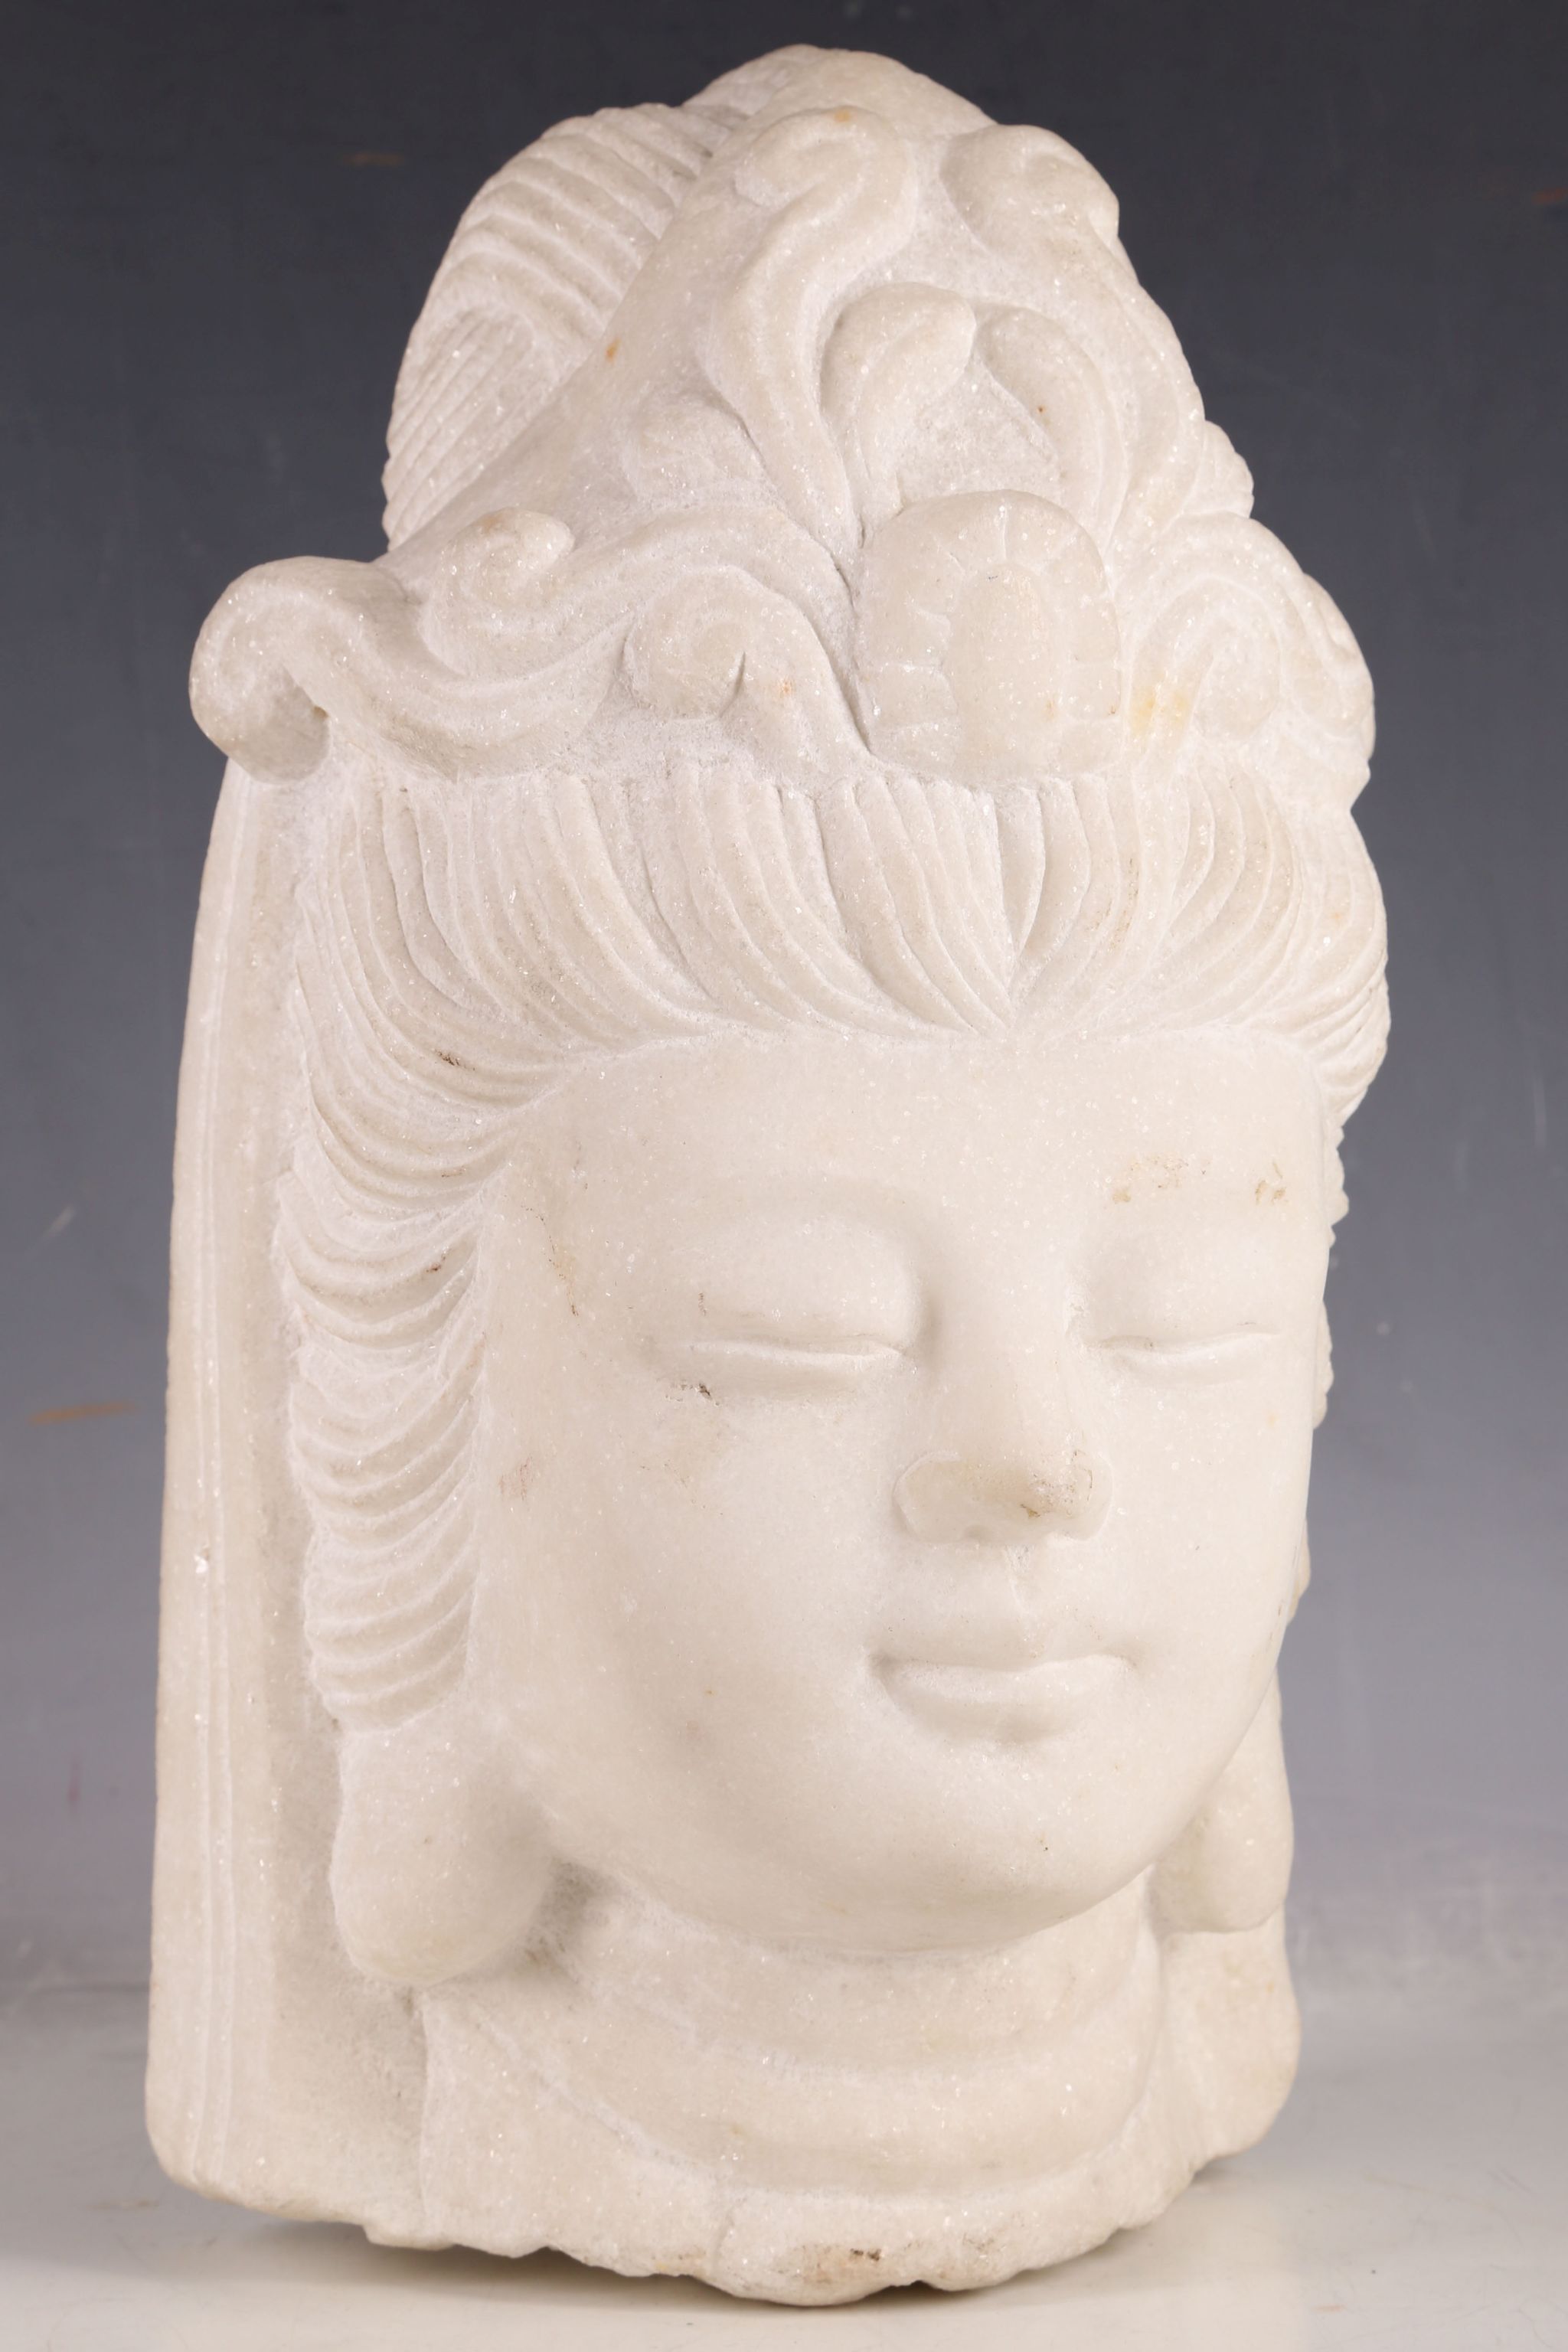 After the Antique, white granite carved head of a Cambodian Buddha.